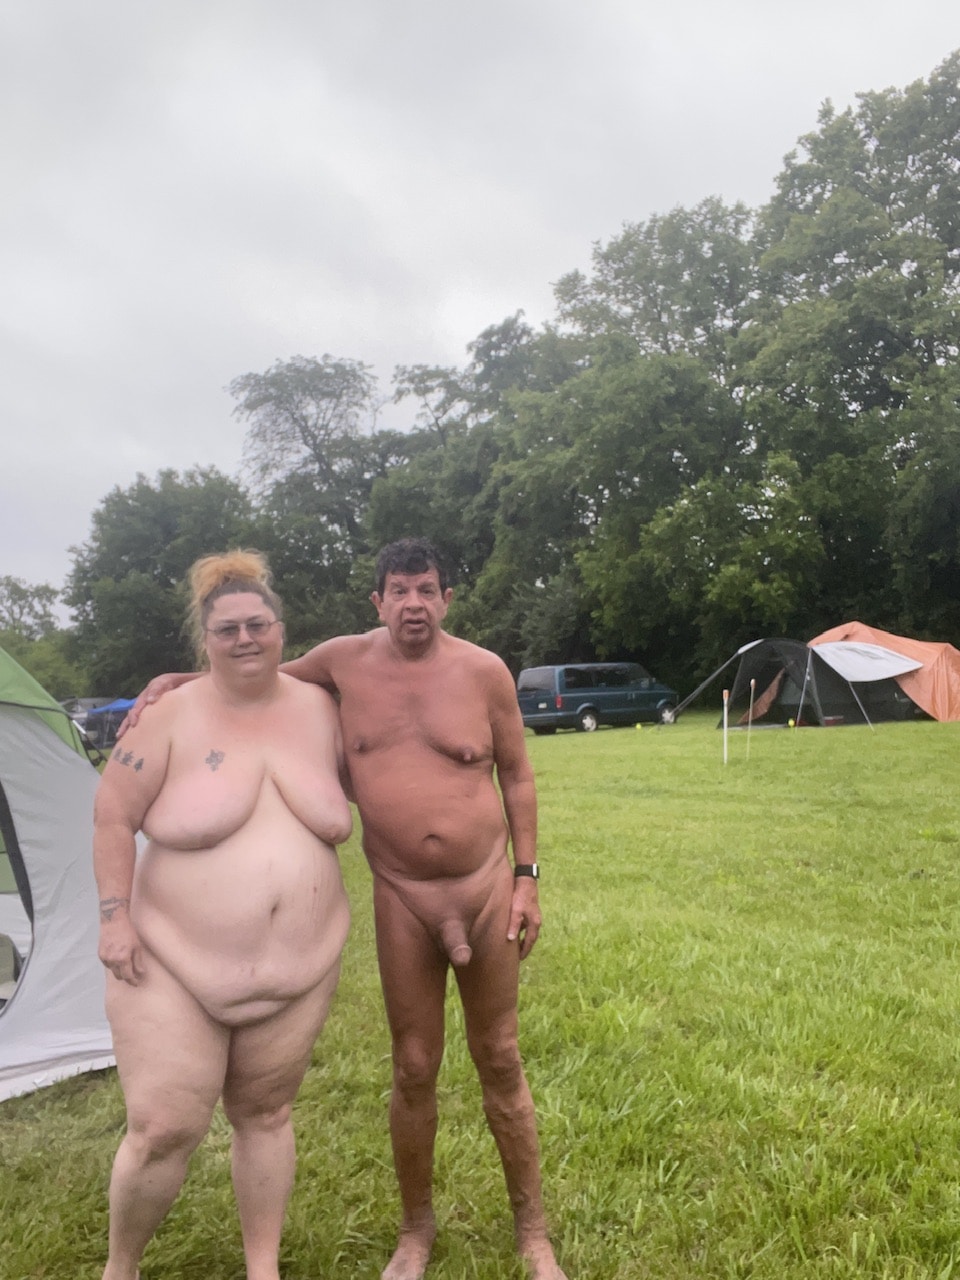 nudists nude camping women - We love camping in the nude - Real Amateurs